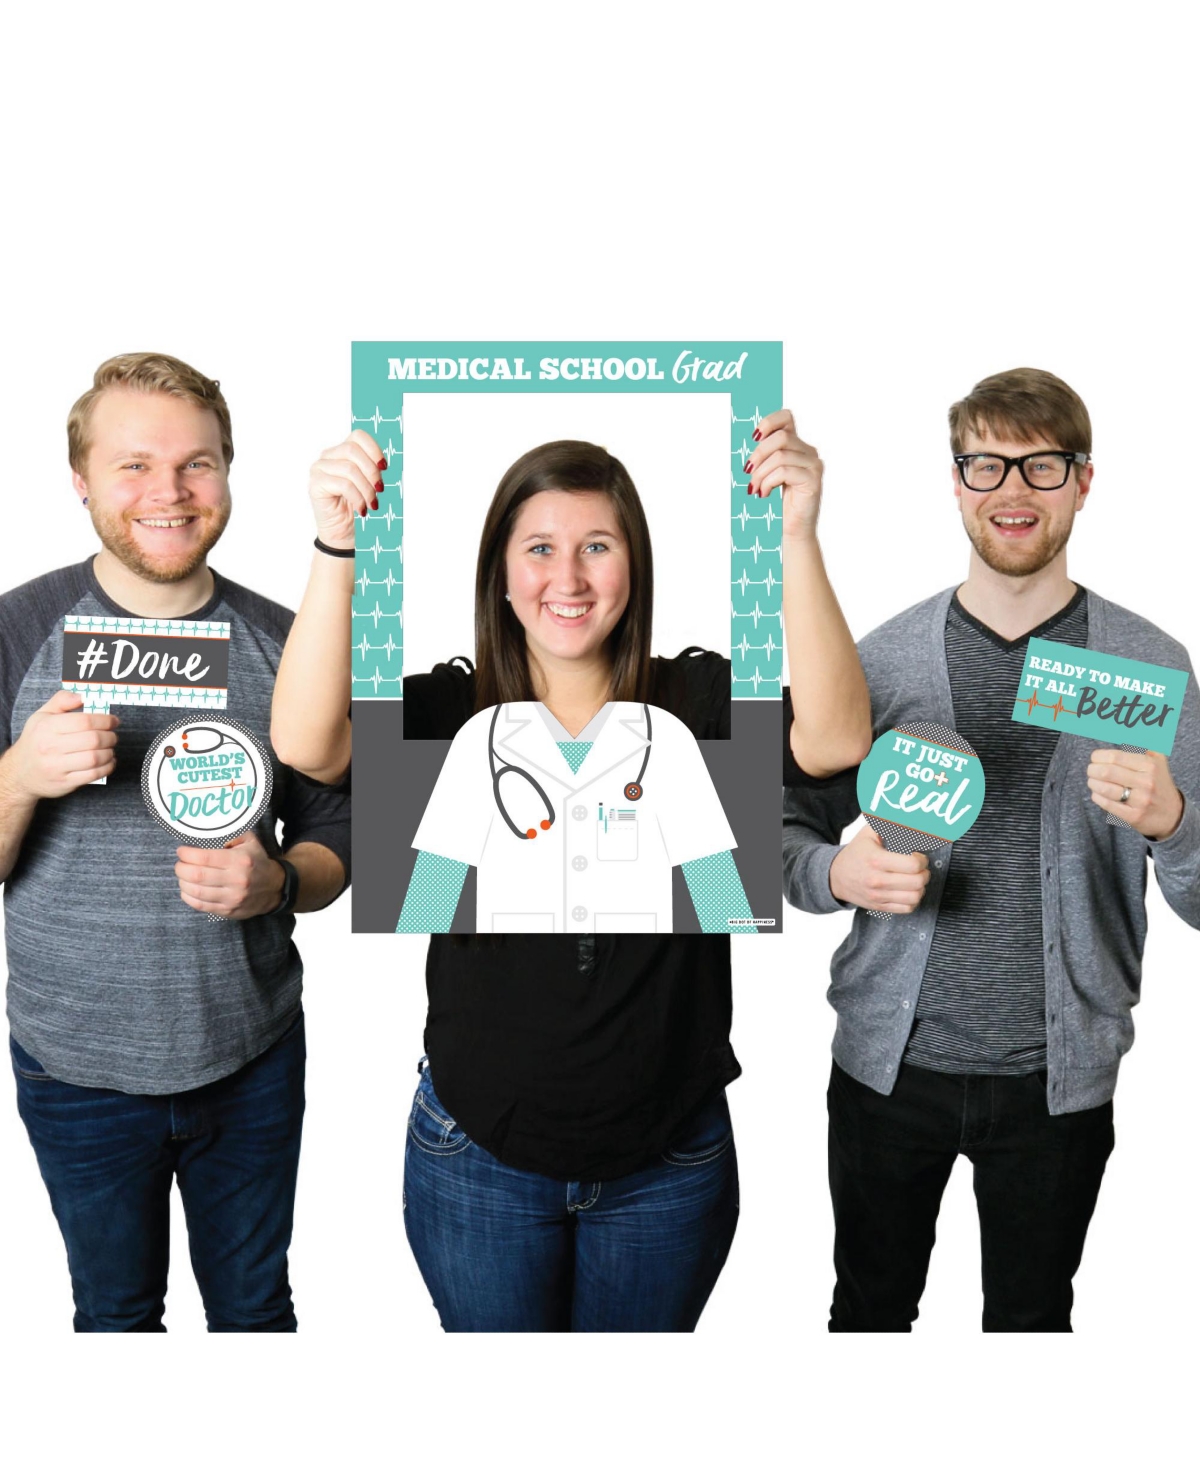 Medical School Grad - Doctor Graduation Selfie Photo Booth Picture Frame & Props